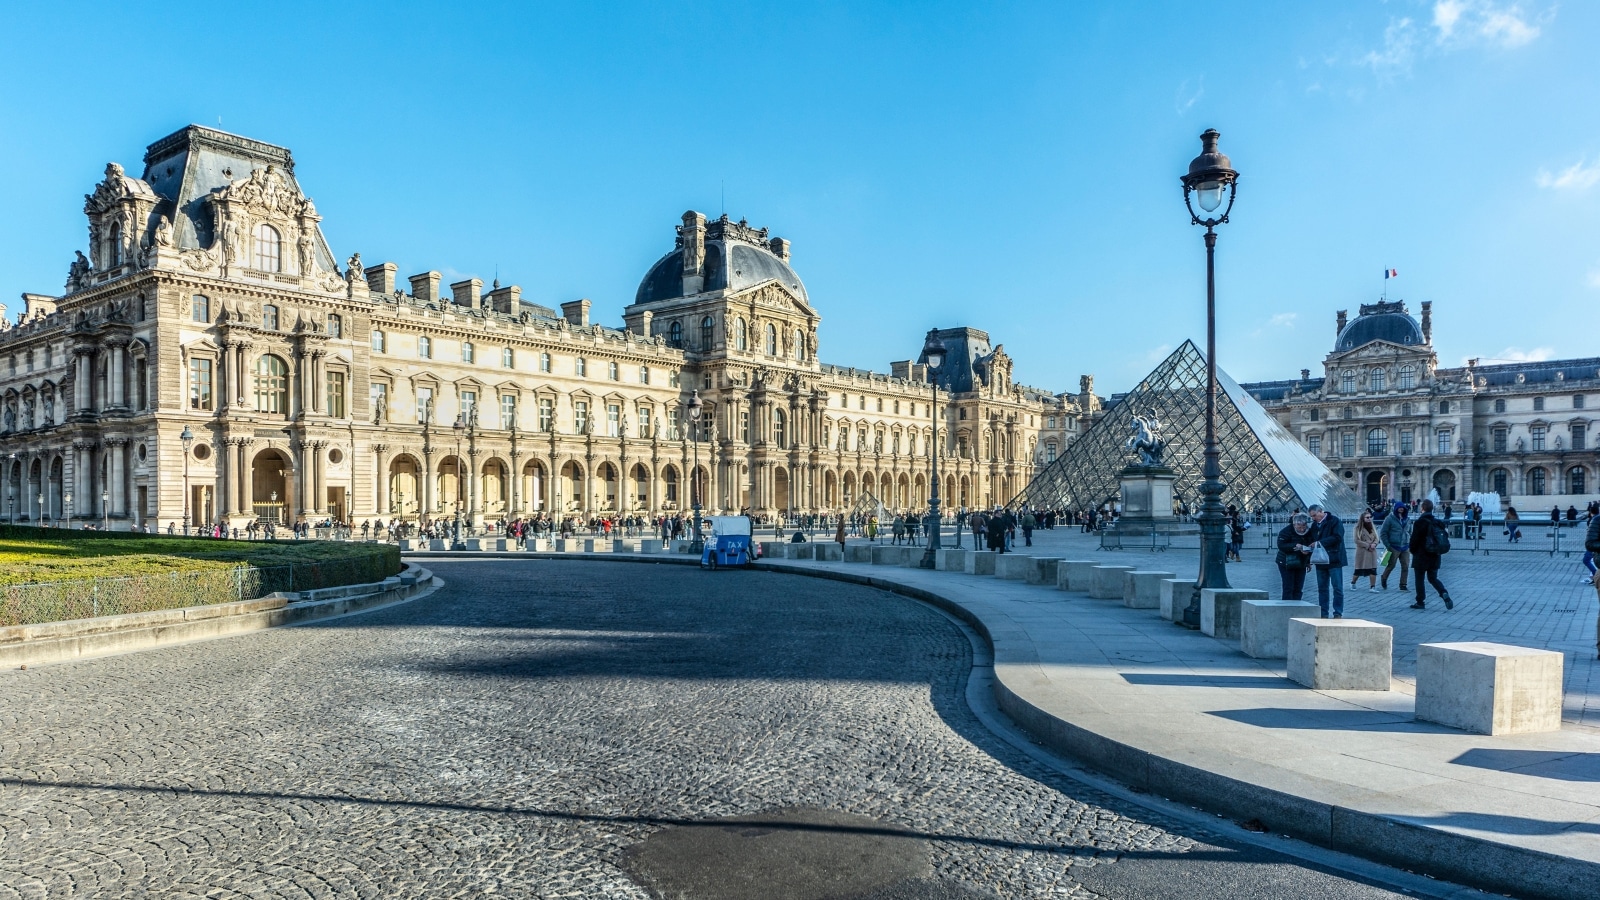 A photograph depicting the Louvre, Paris, France. The image captures the exterior of the renowned museum, showcasing its iconic architectural structure